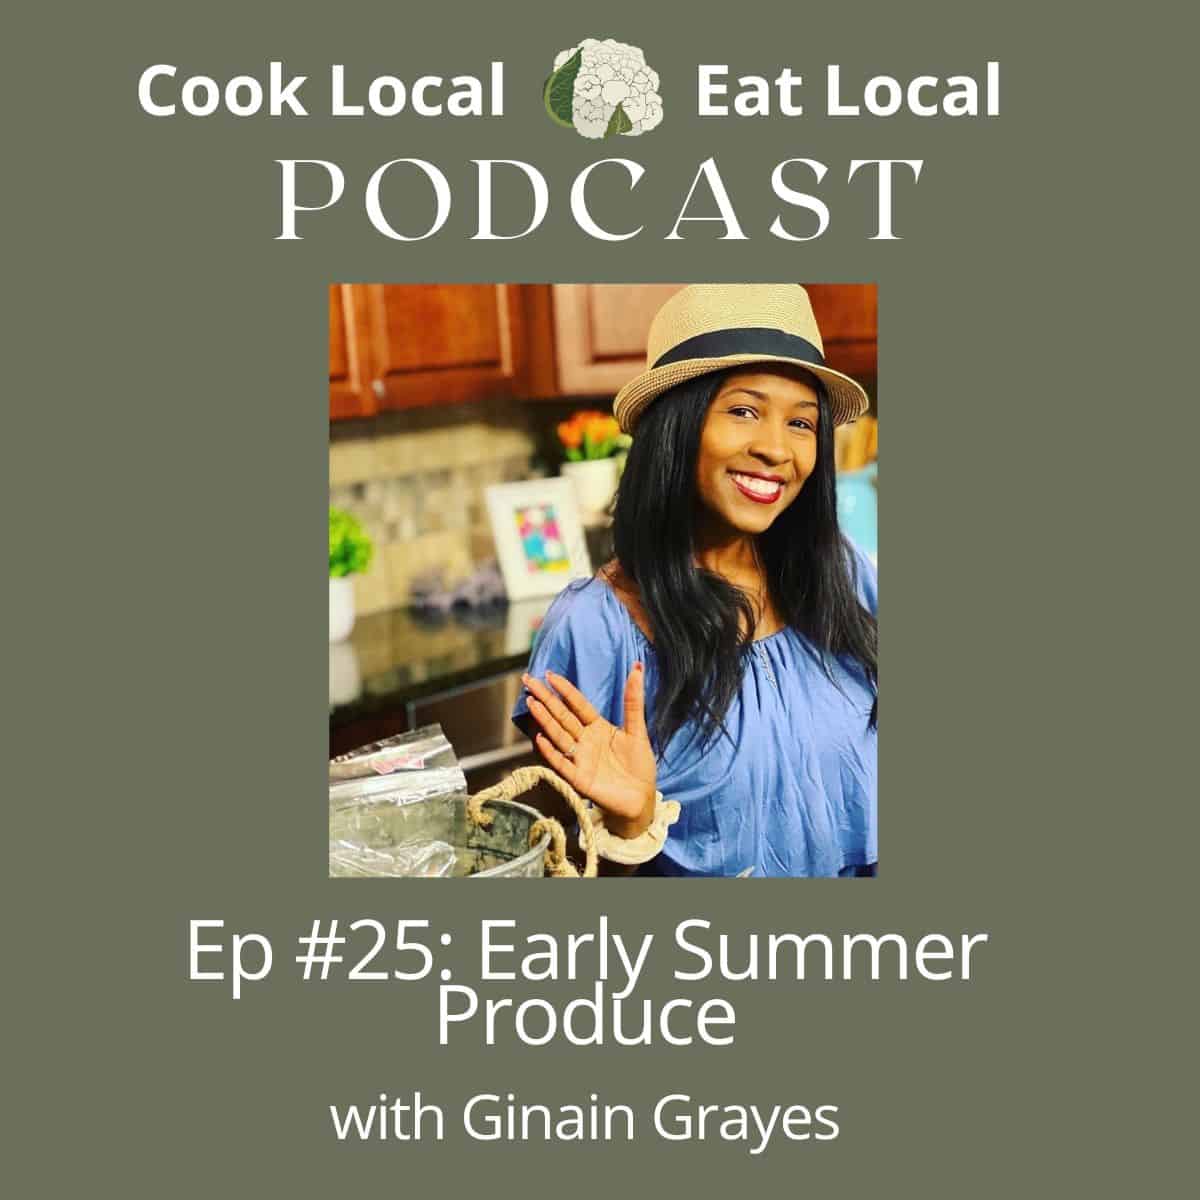 Cook Local Eat Local Podcast cover art, with a photo of episode 25 guest Ginain Grayes.